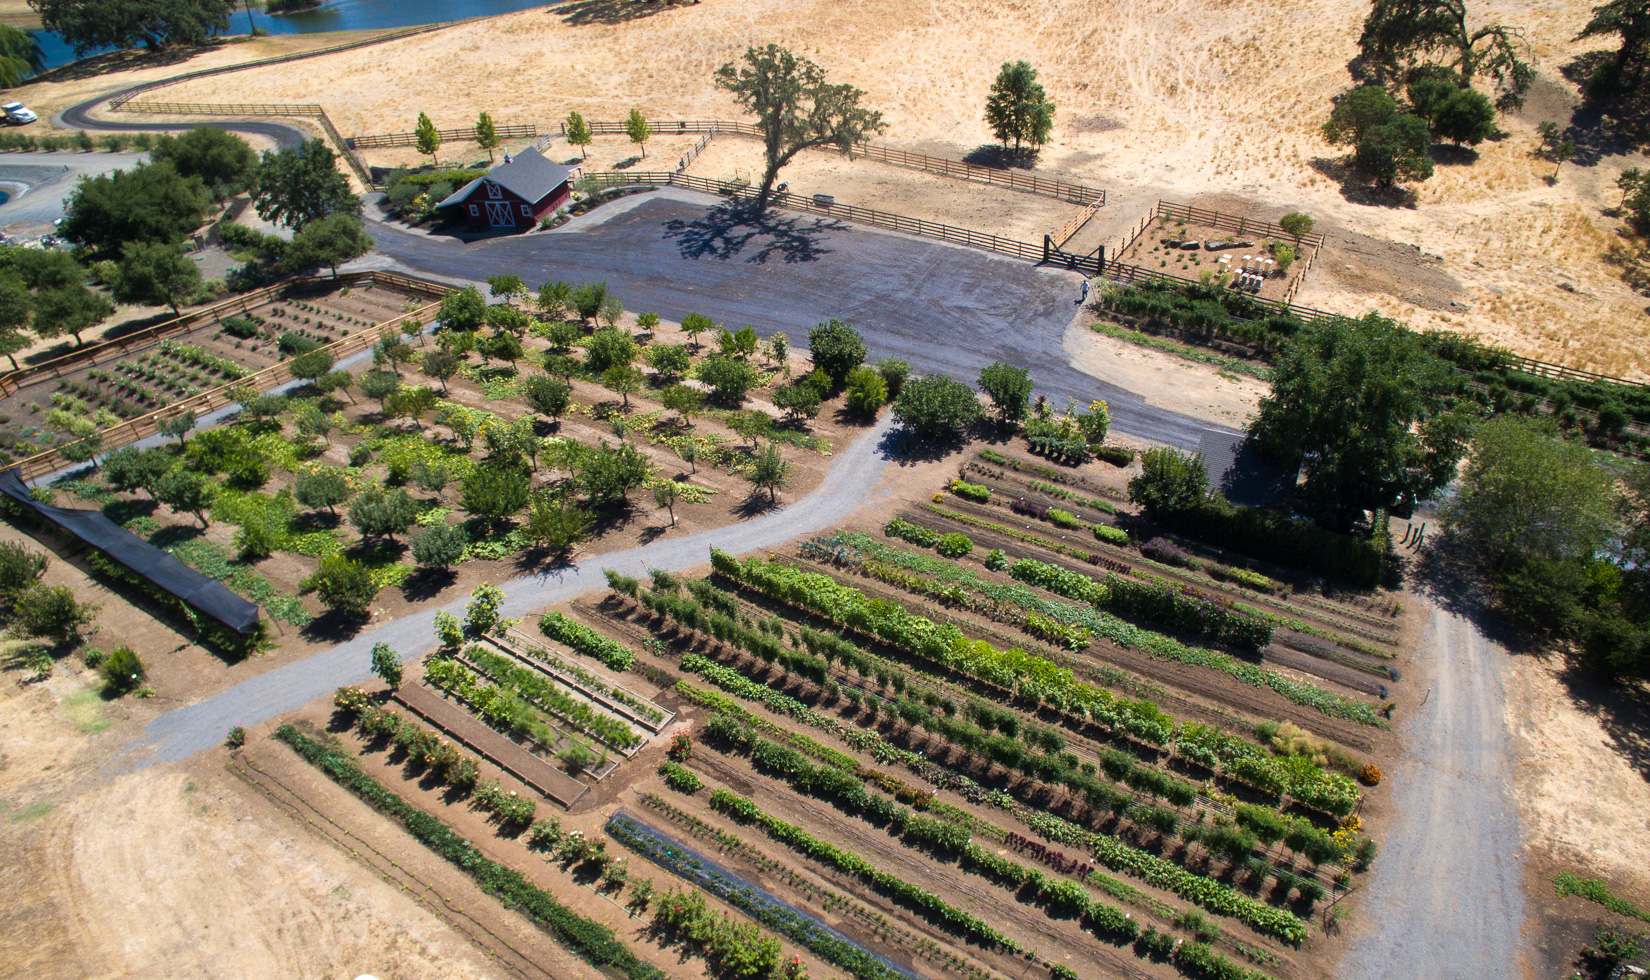 Aerial view of the Jordan gardens and apiary